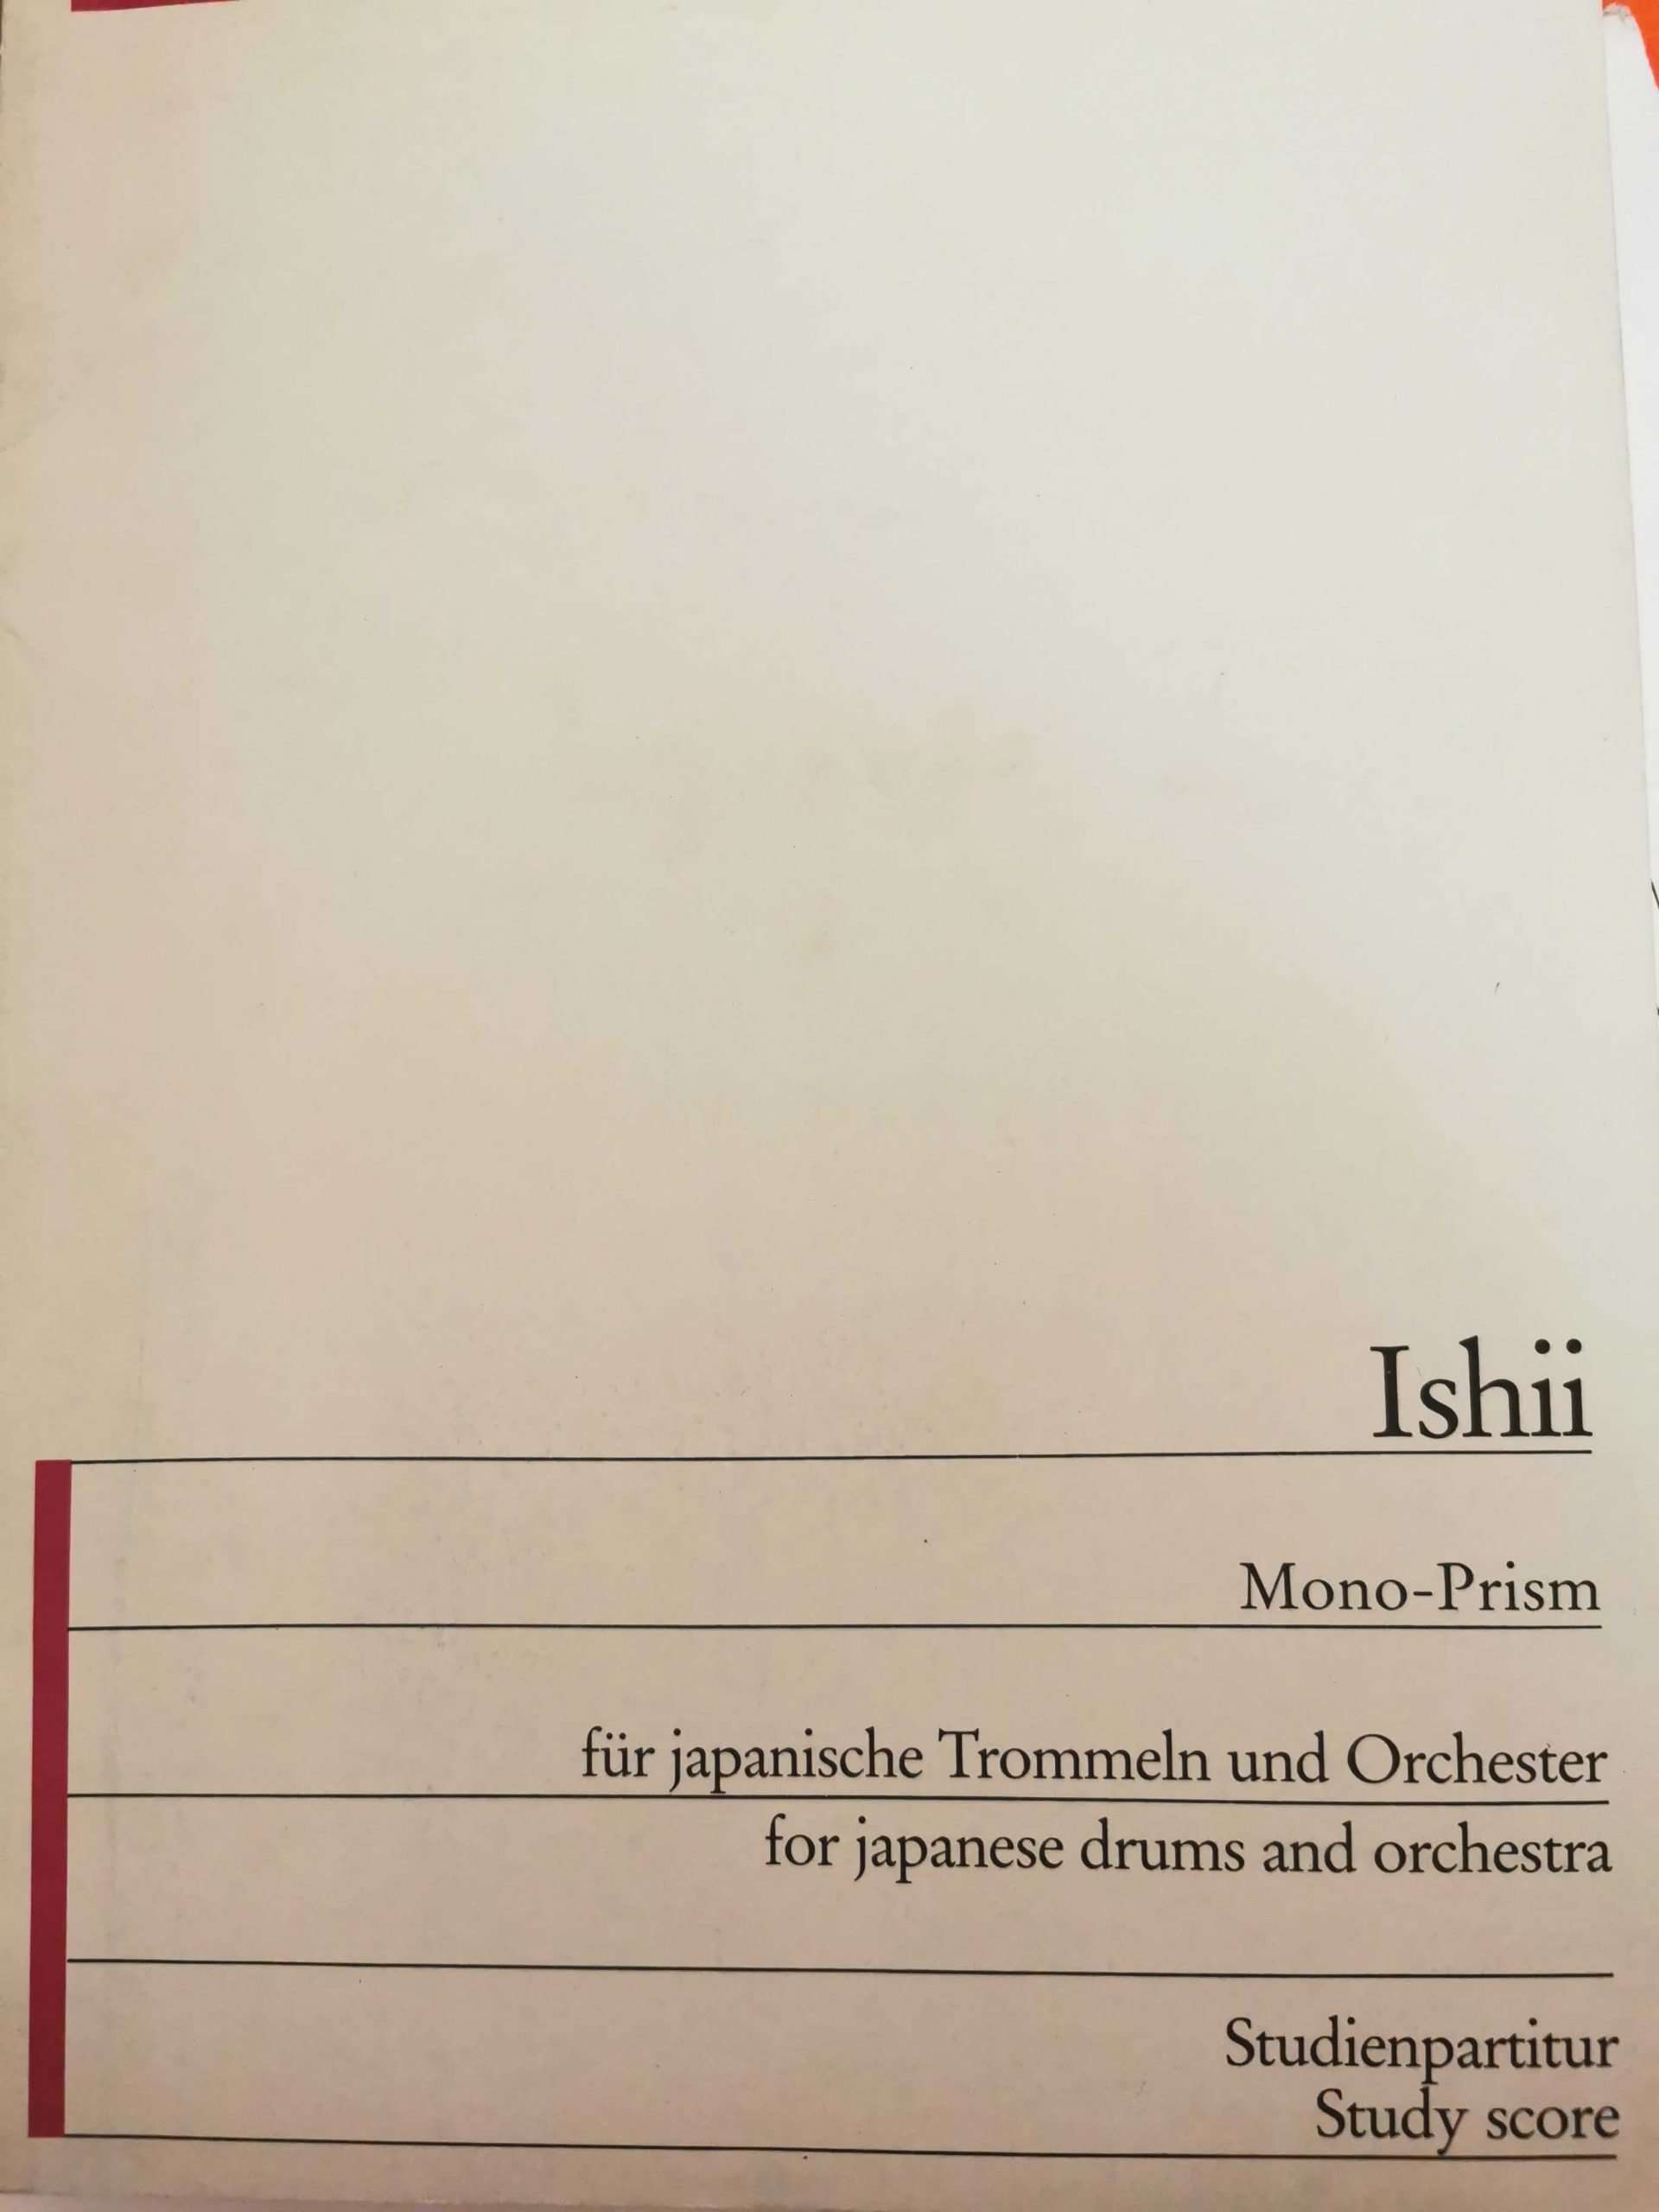 Mono-Prism for Japanese Drums and Orchestra (Score) by Maki Ishii